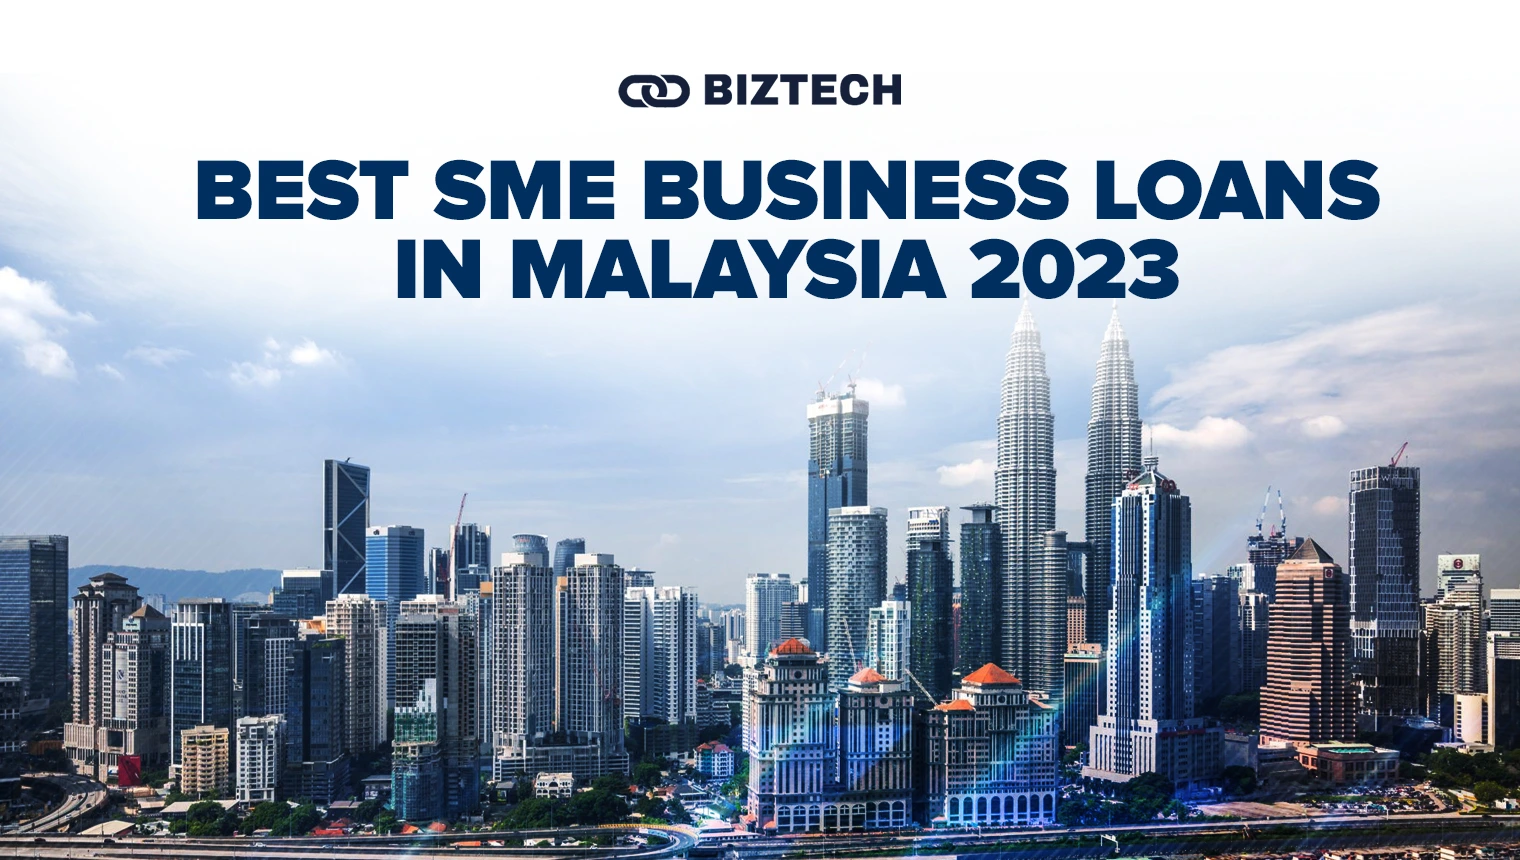 Guide to Best Small Business / SME Loans in Malaysia (2023)